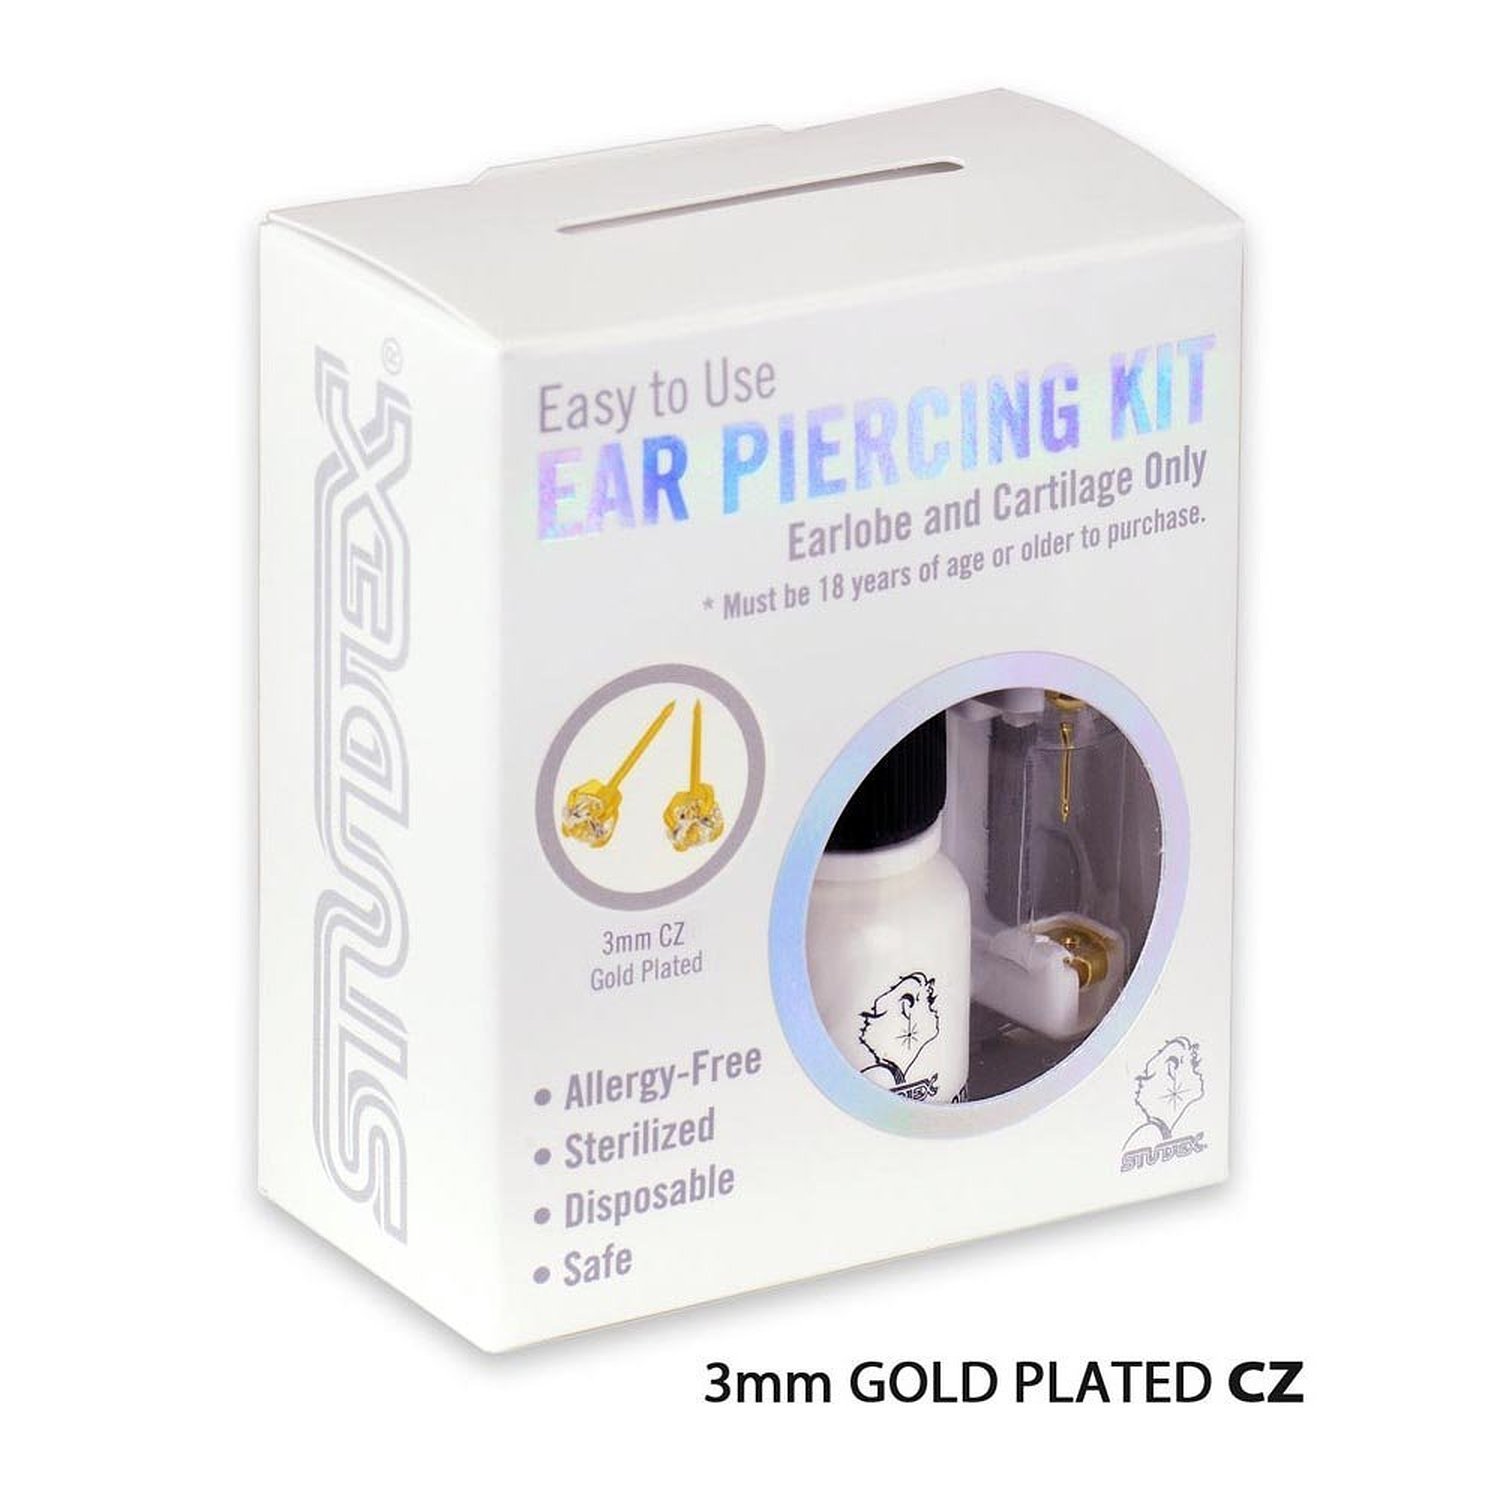 Special Deal: 8 Sets System 75 Personal Ear Piercer Piercing Studs Cartilage Ear - $76.99